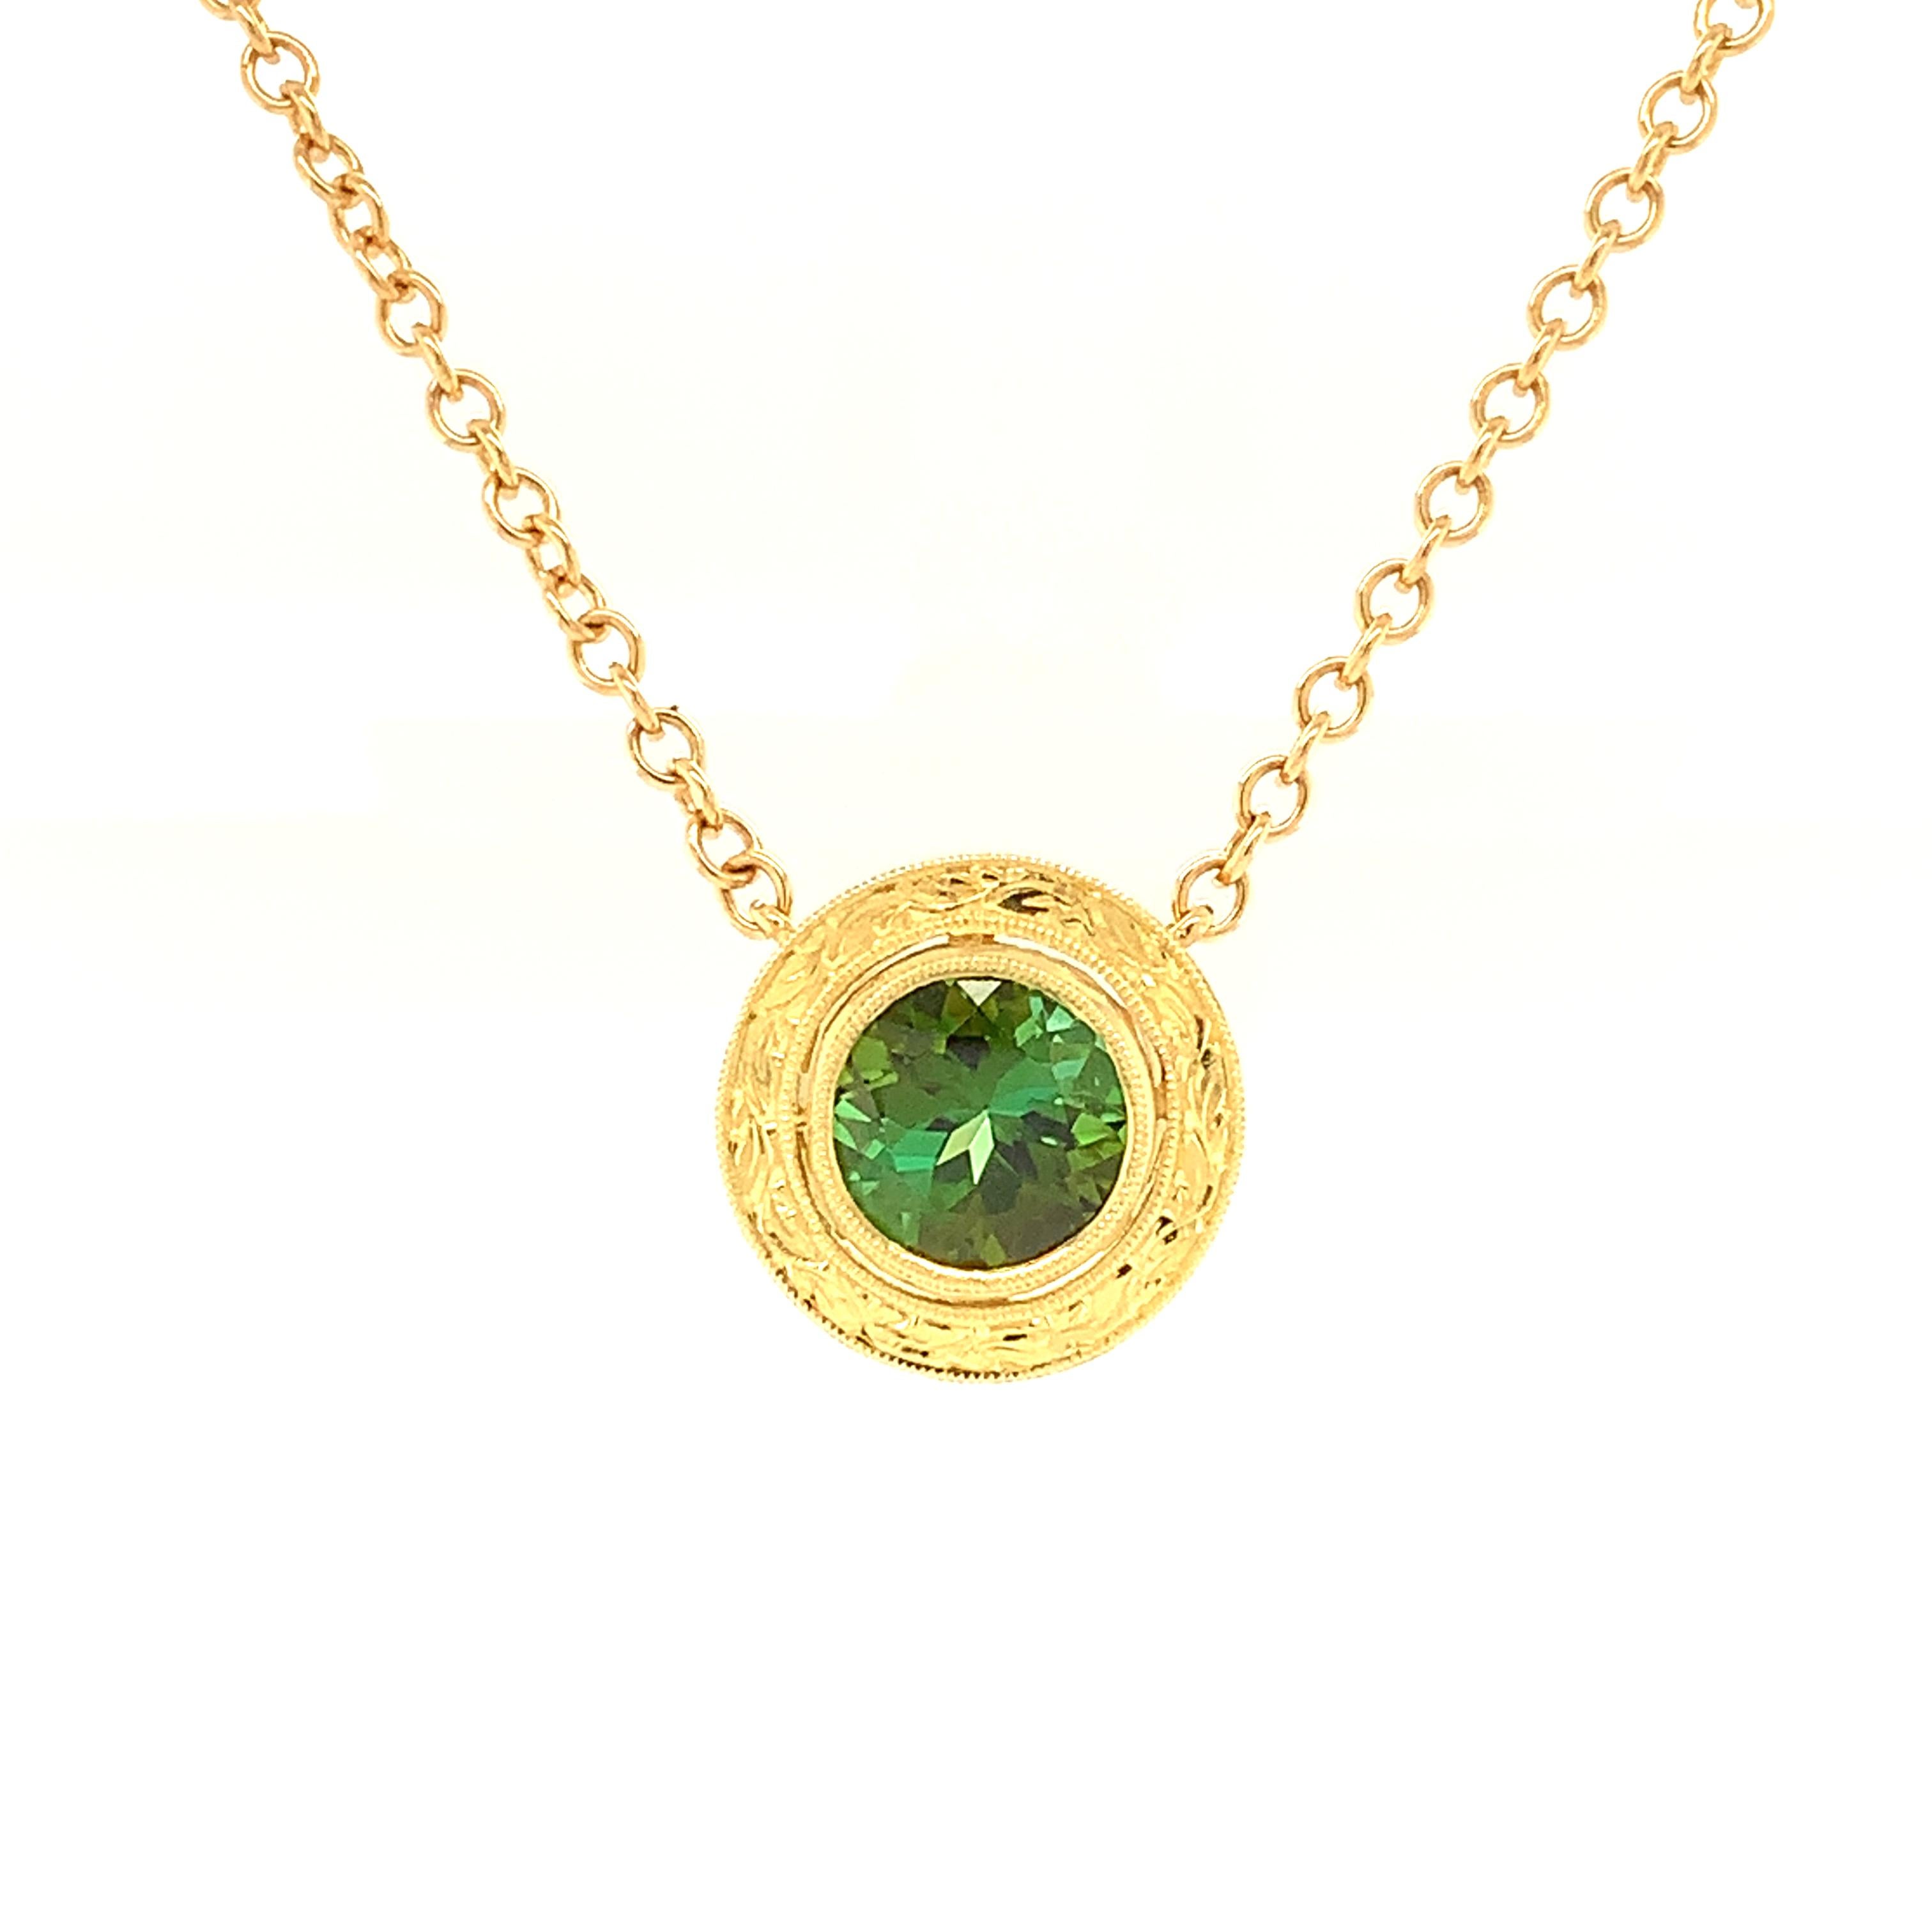 This pretty necklace is part of our Day and Night Signature Collection and features a beautiful 2.45 carat verdant green tourmaline. Handmade in 18k yellow gold by our Master Jewelers in Los Angeles, this necklace with its intricate details and hand